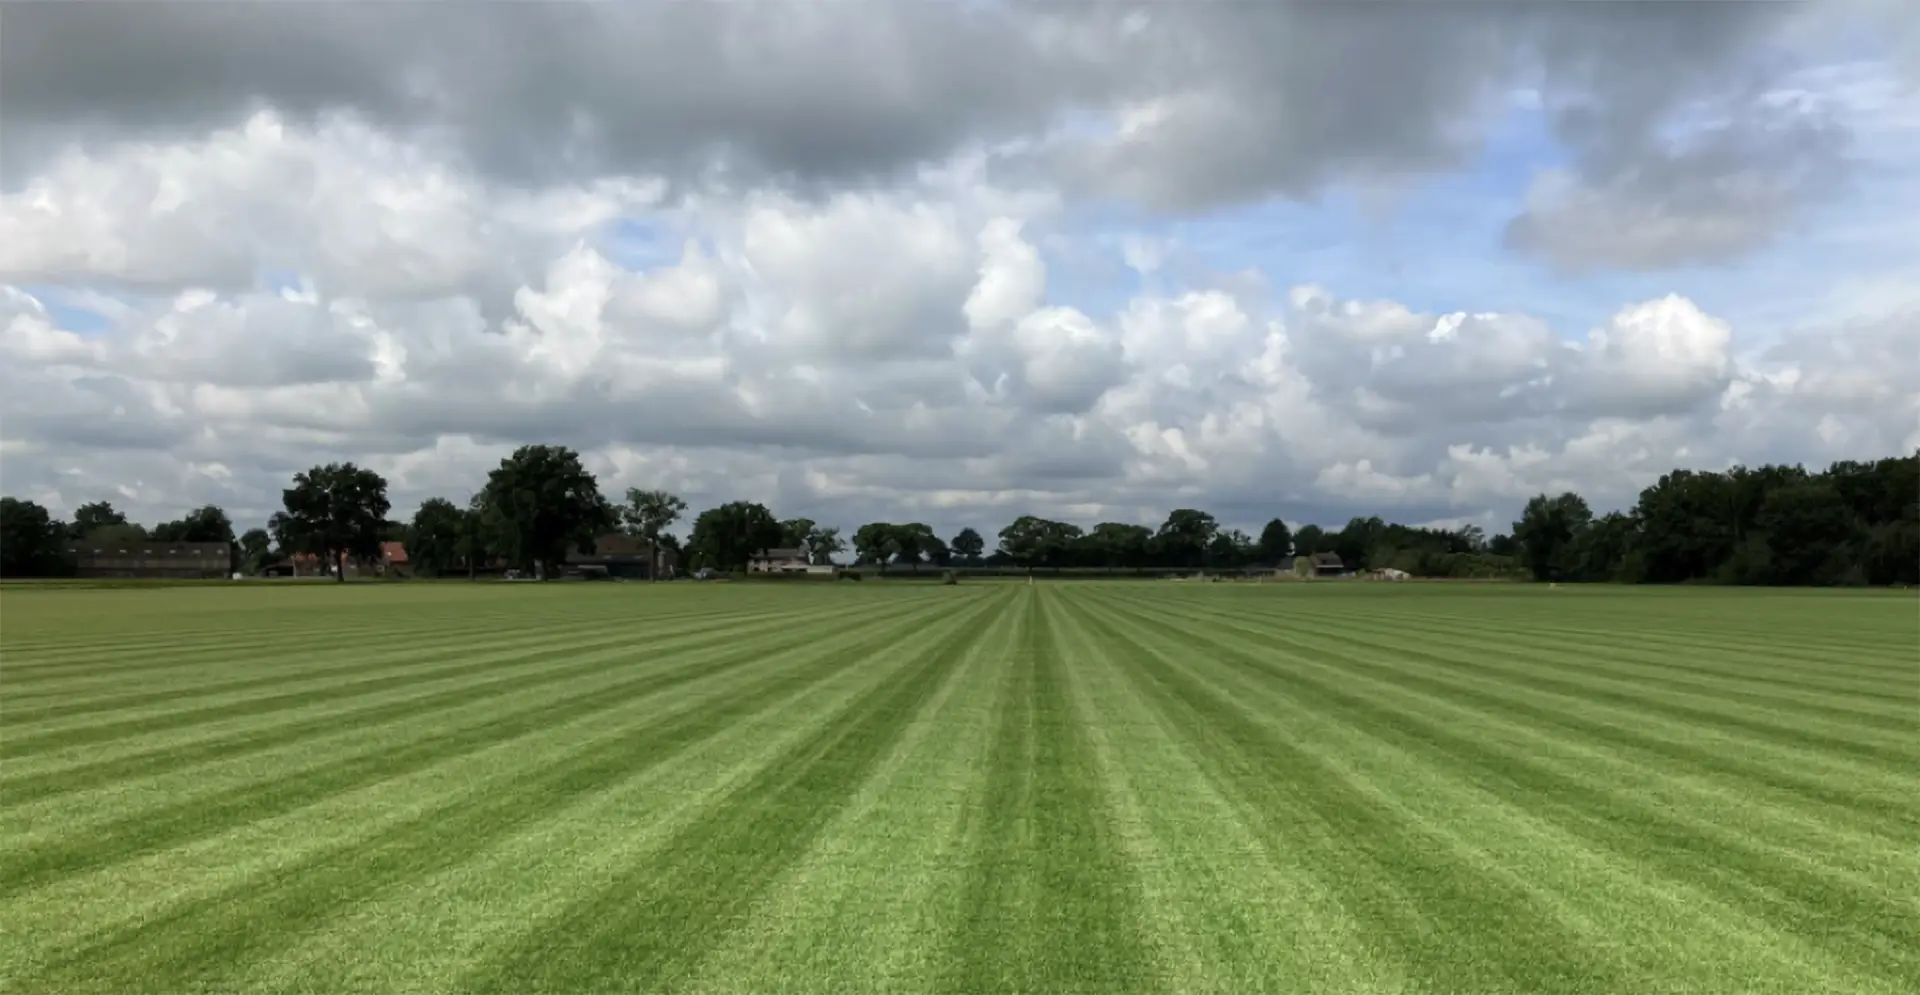 Proven: automatic mowing is key for turf producers (case study)